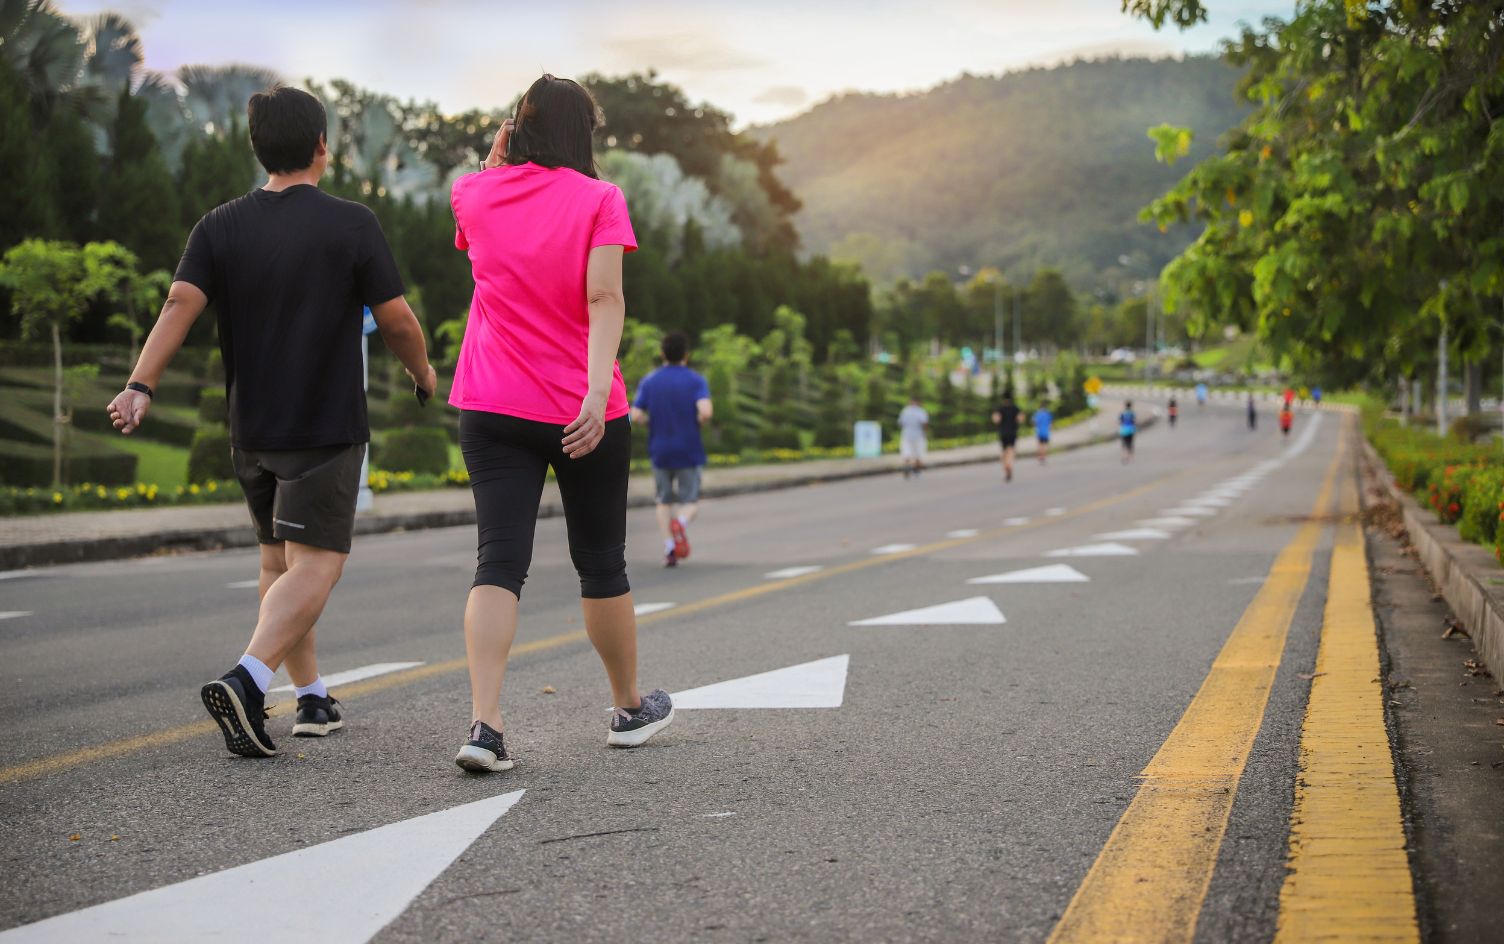 7 Surprising Health Benefits of a Daily Walk